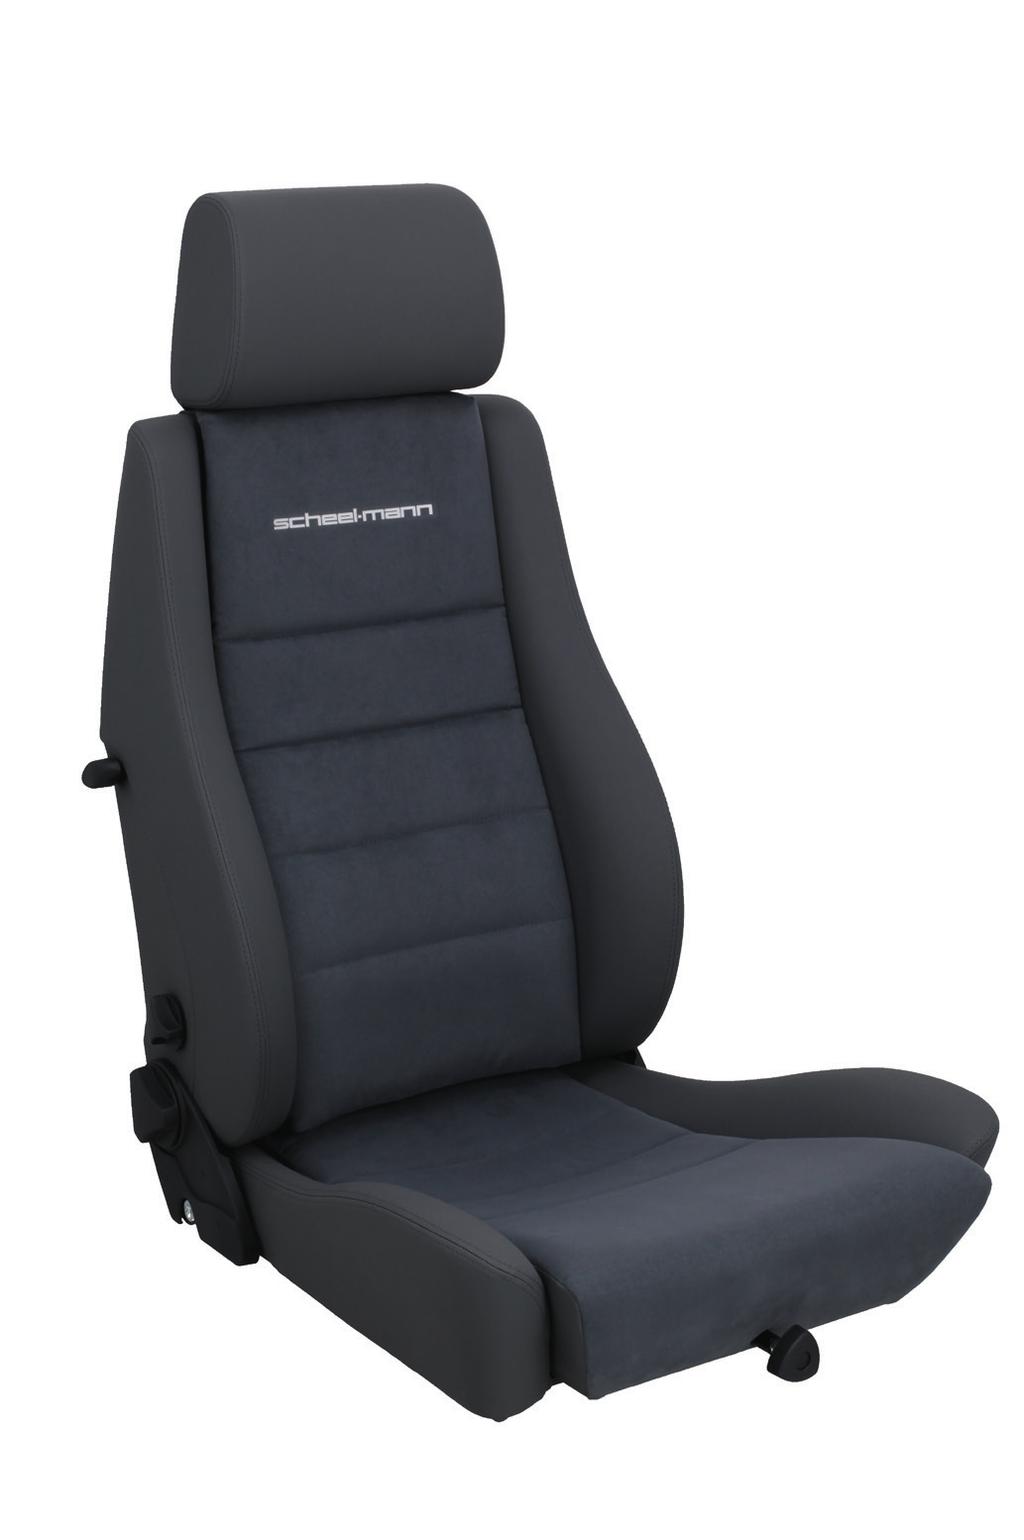 Vario XXL The Vario XXL series features an impressively high backrest designed specifically for the taller driver.